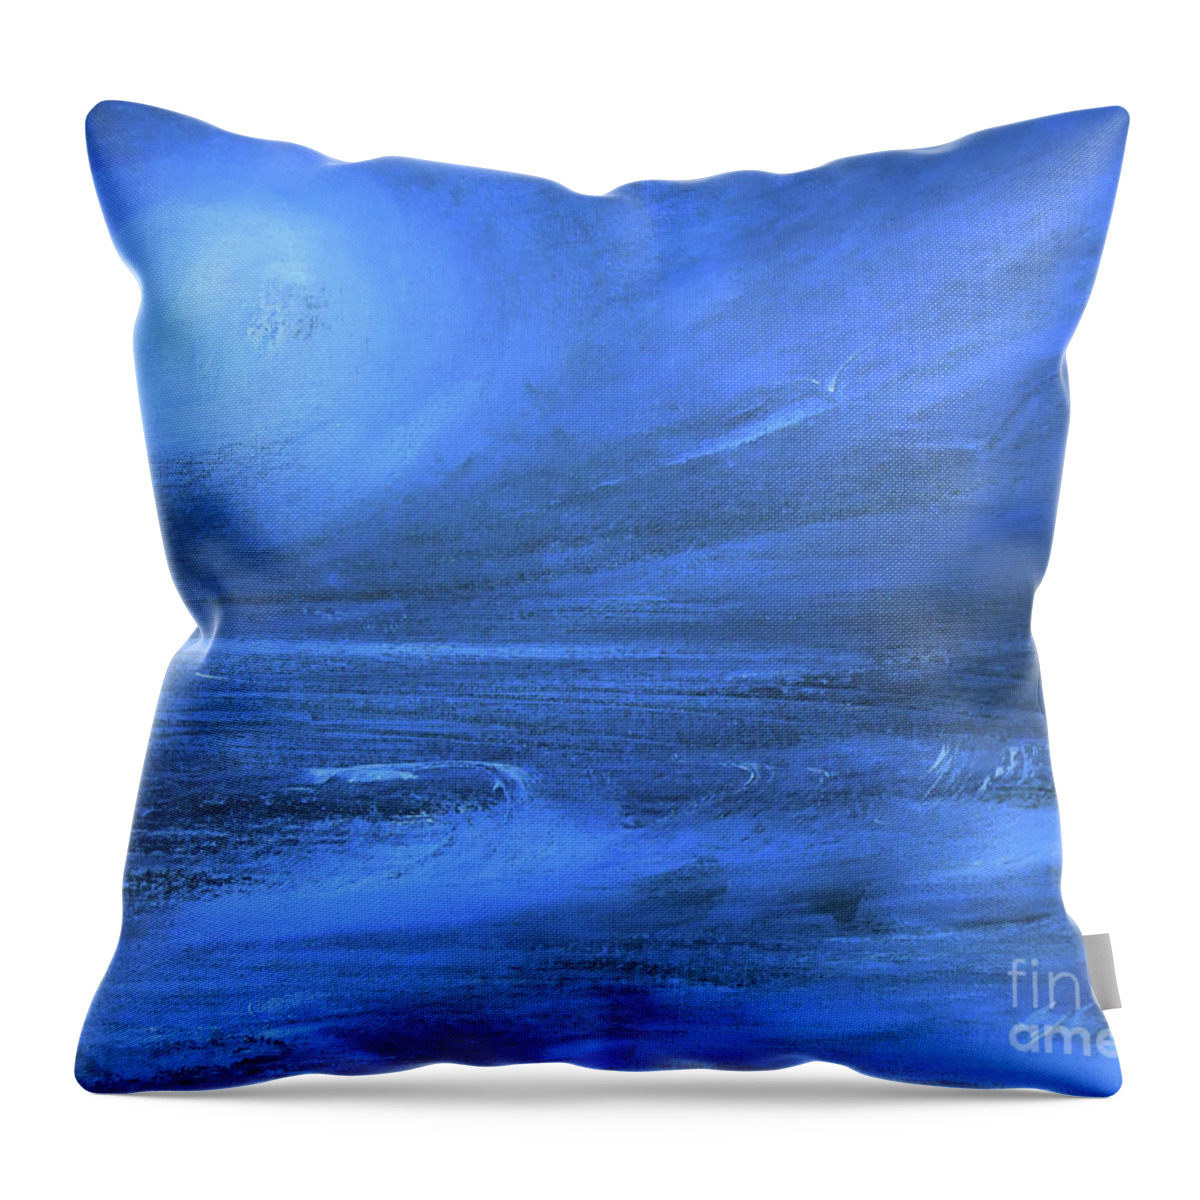 Lunar Effect Throw Pillow featuring the painting Lunar Effect by Jane See